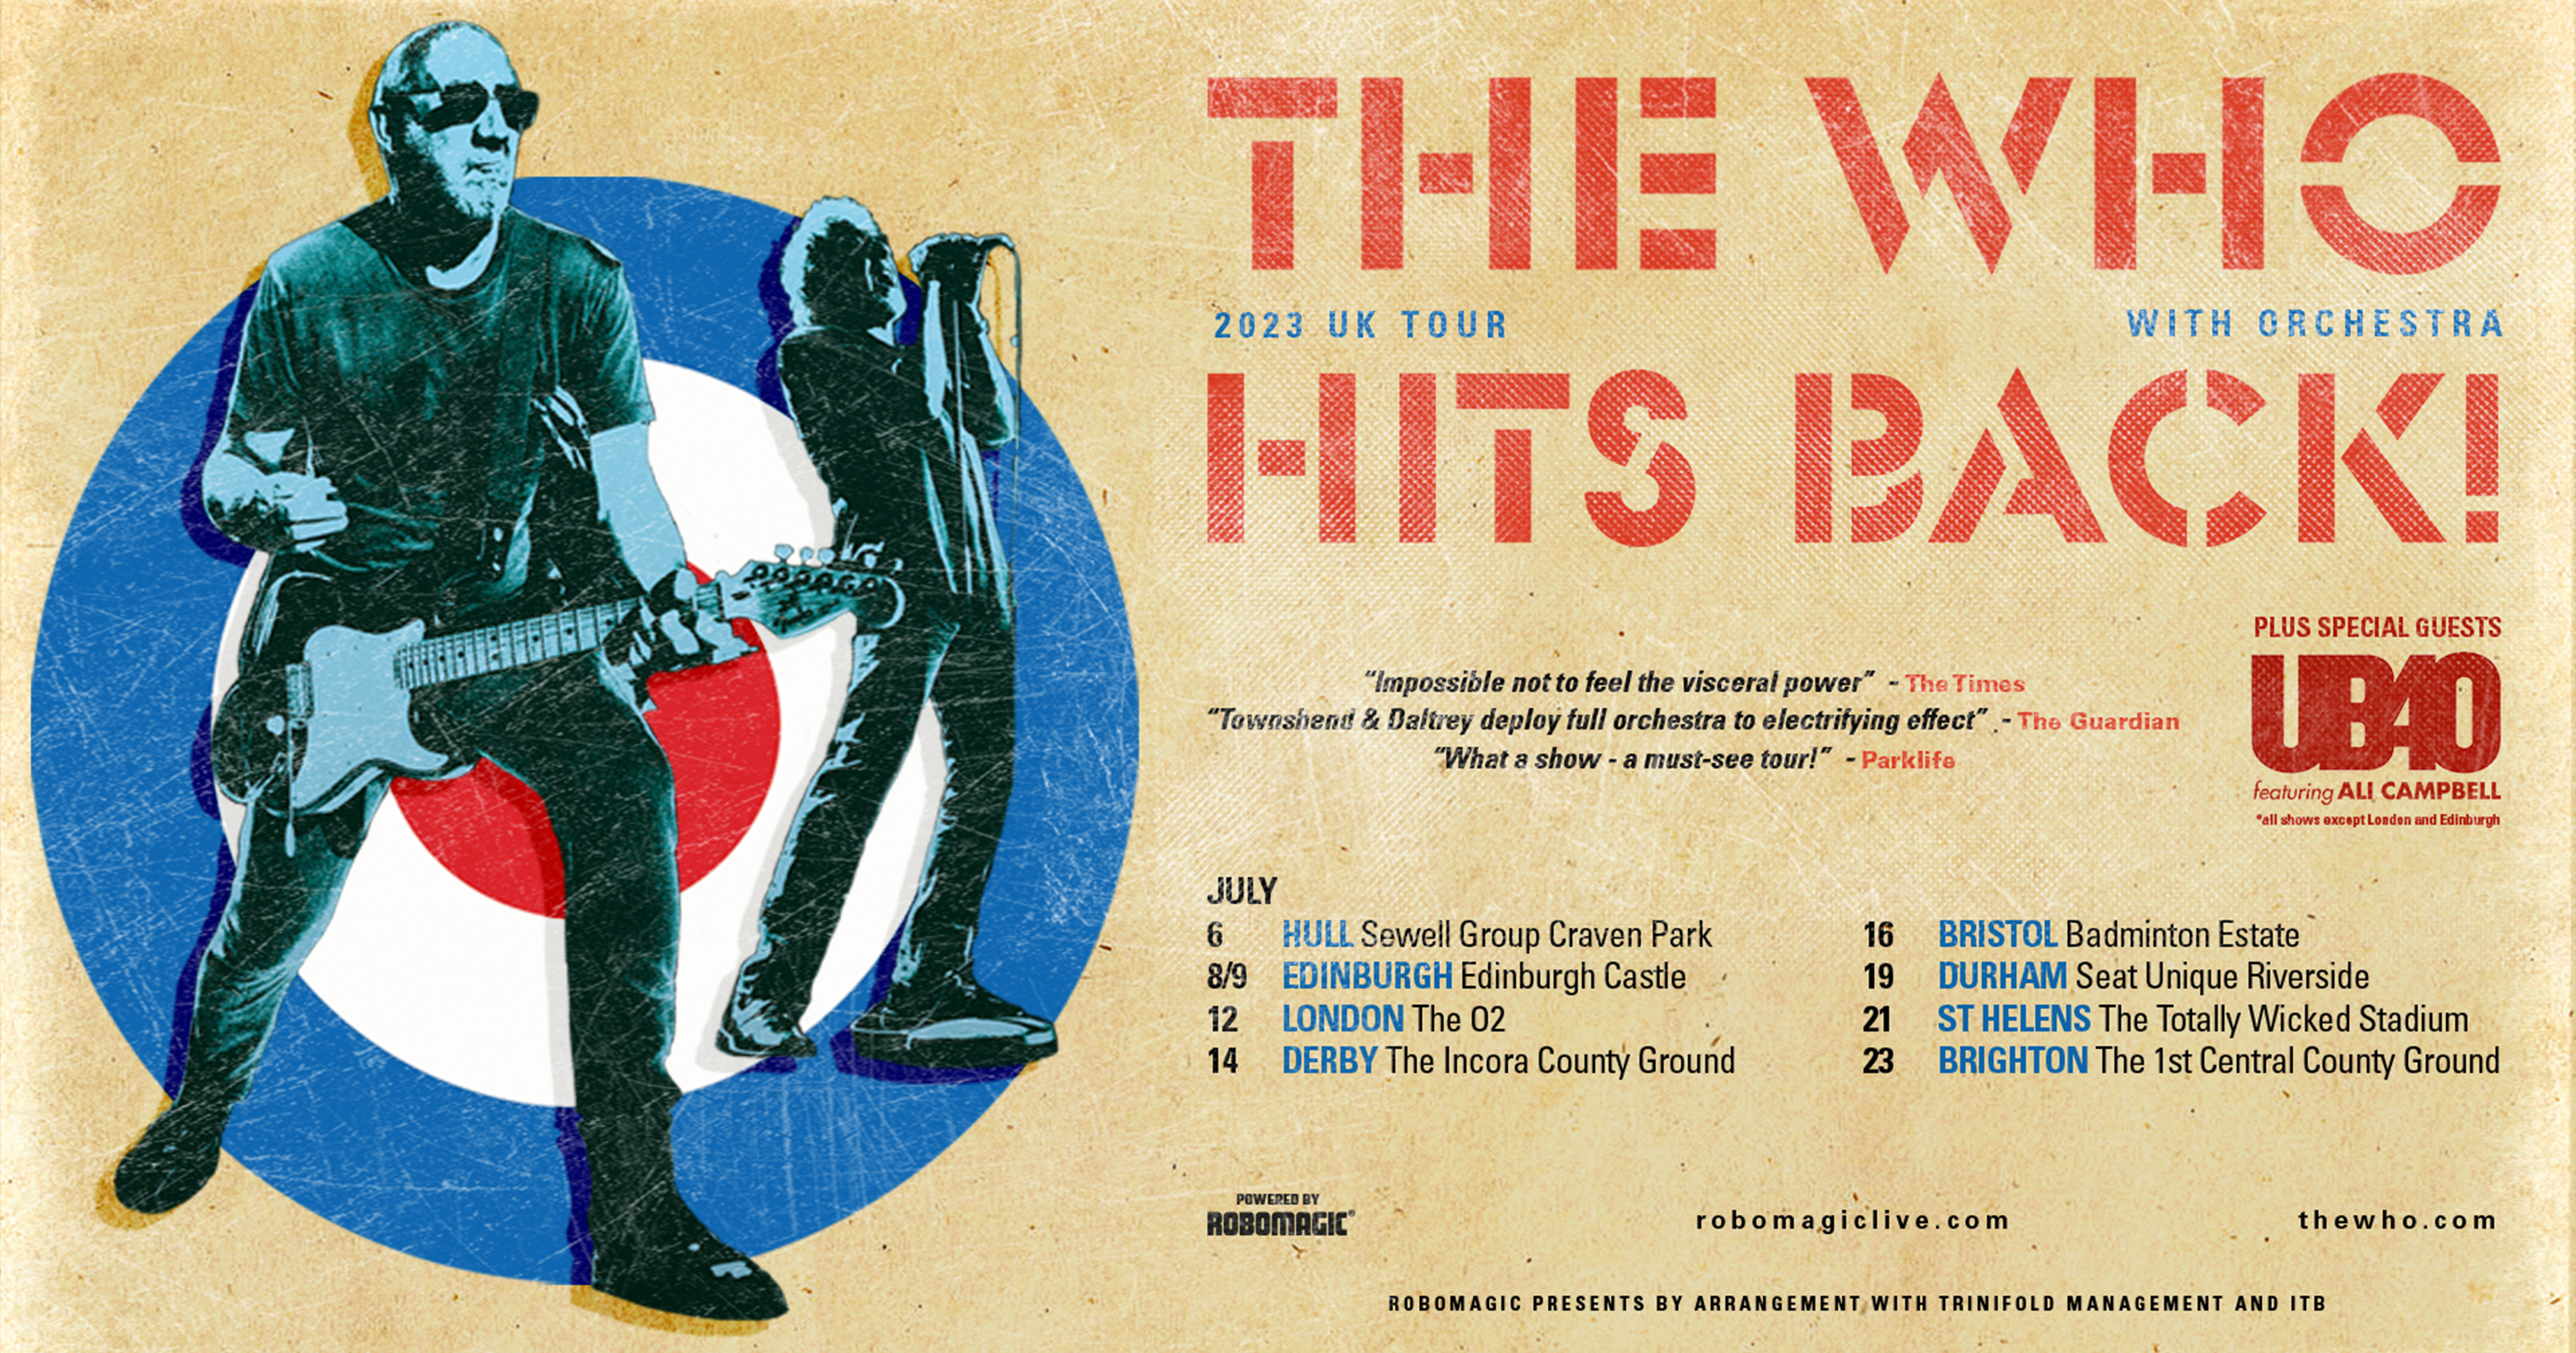 The Who Hits Back! 2023 Tour promo poster